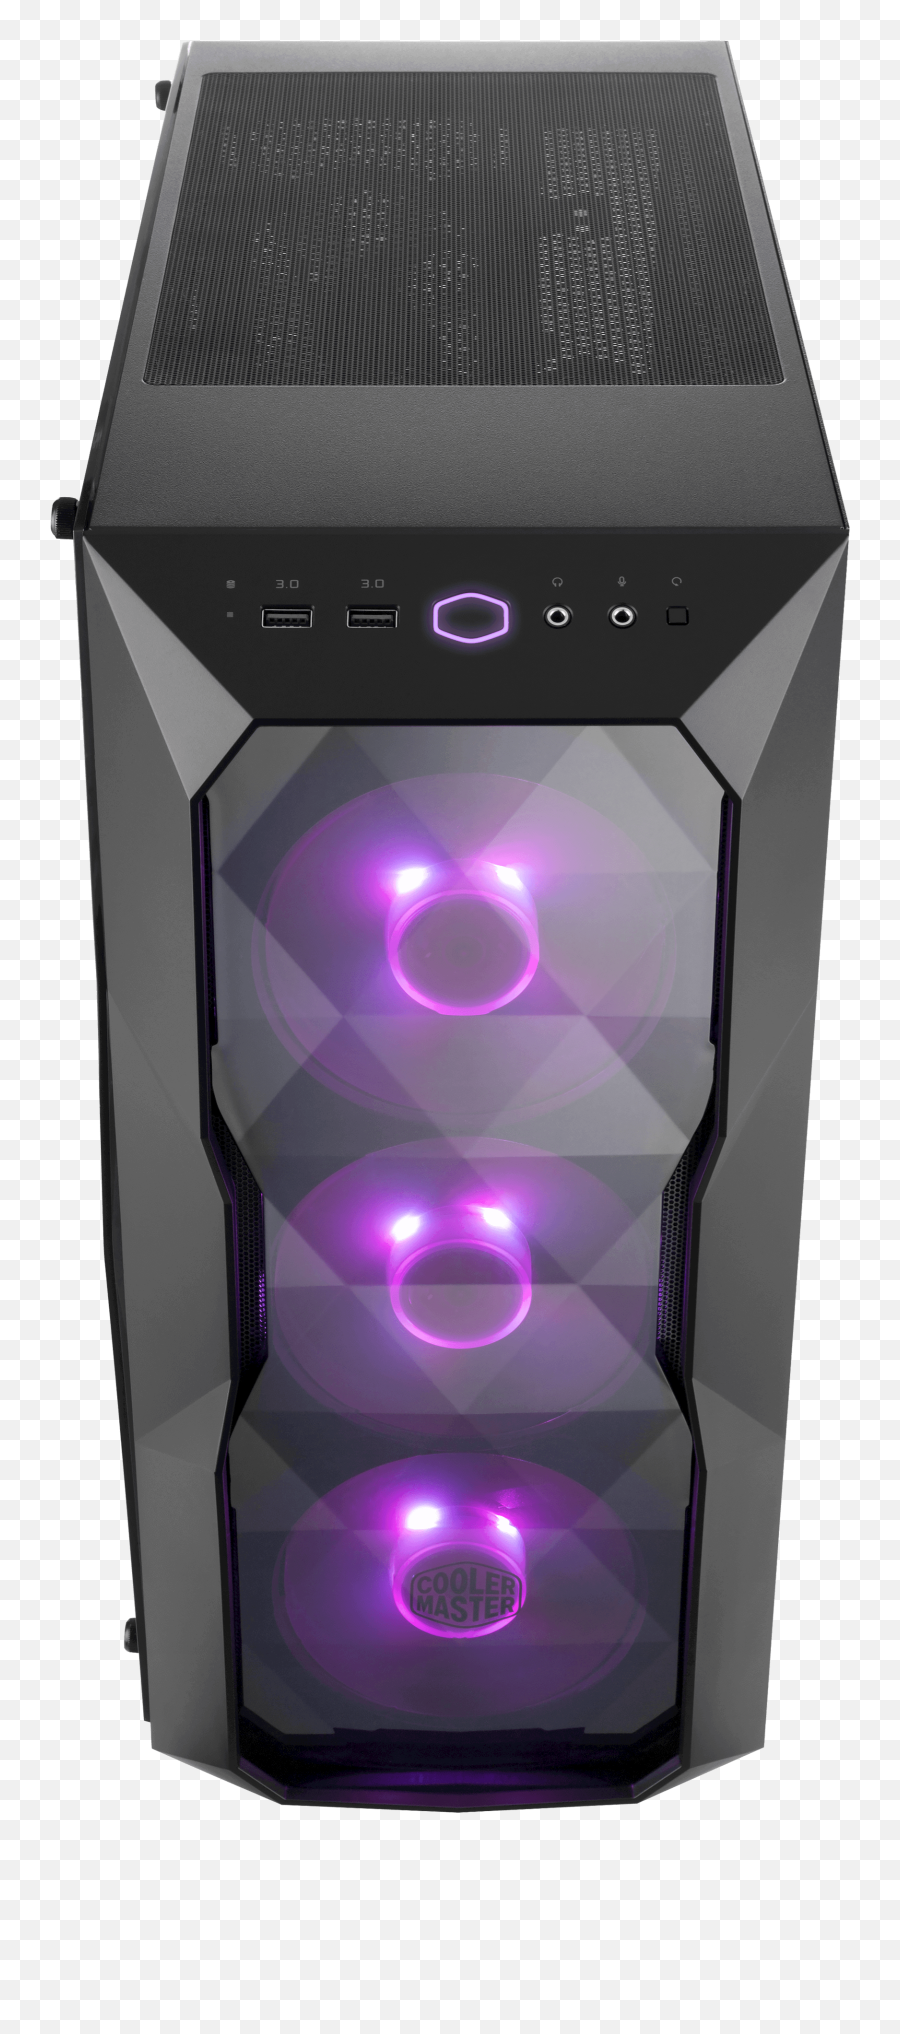 Masterbox Td500 Cooler Master - Cooler Master Masterbox Td500 Png,Cool Effects Png